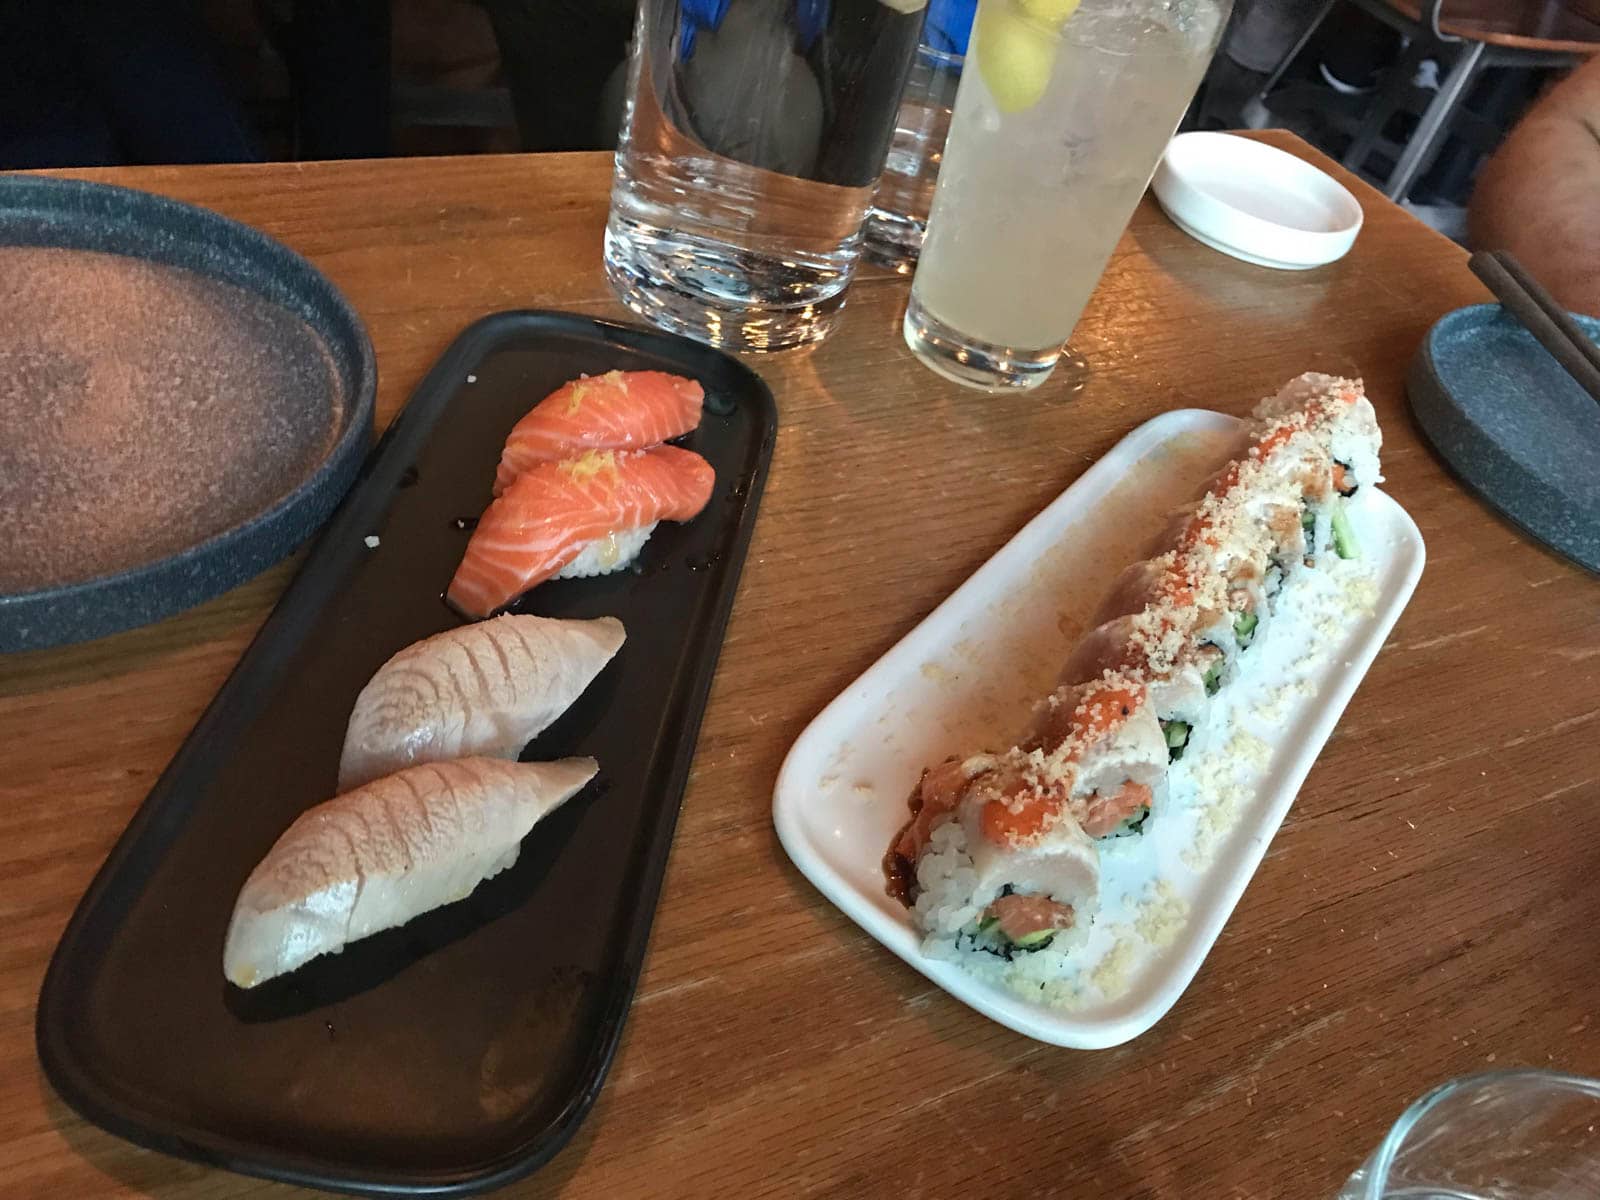 Two long rectangular plates with sushi served on them. One has nigiri with fish slices on top, and the other has intricately assembled rolls of sushi.